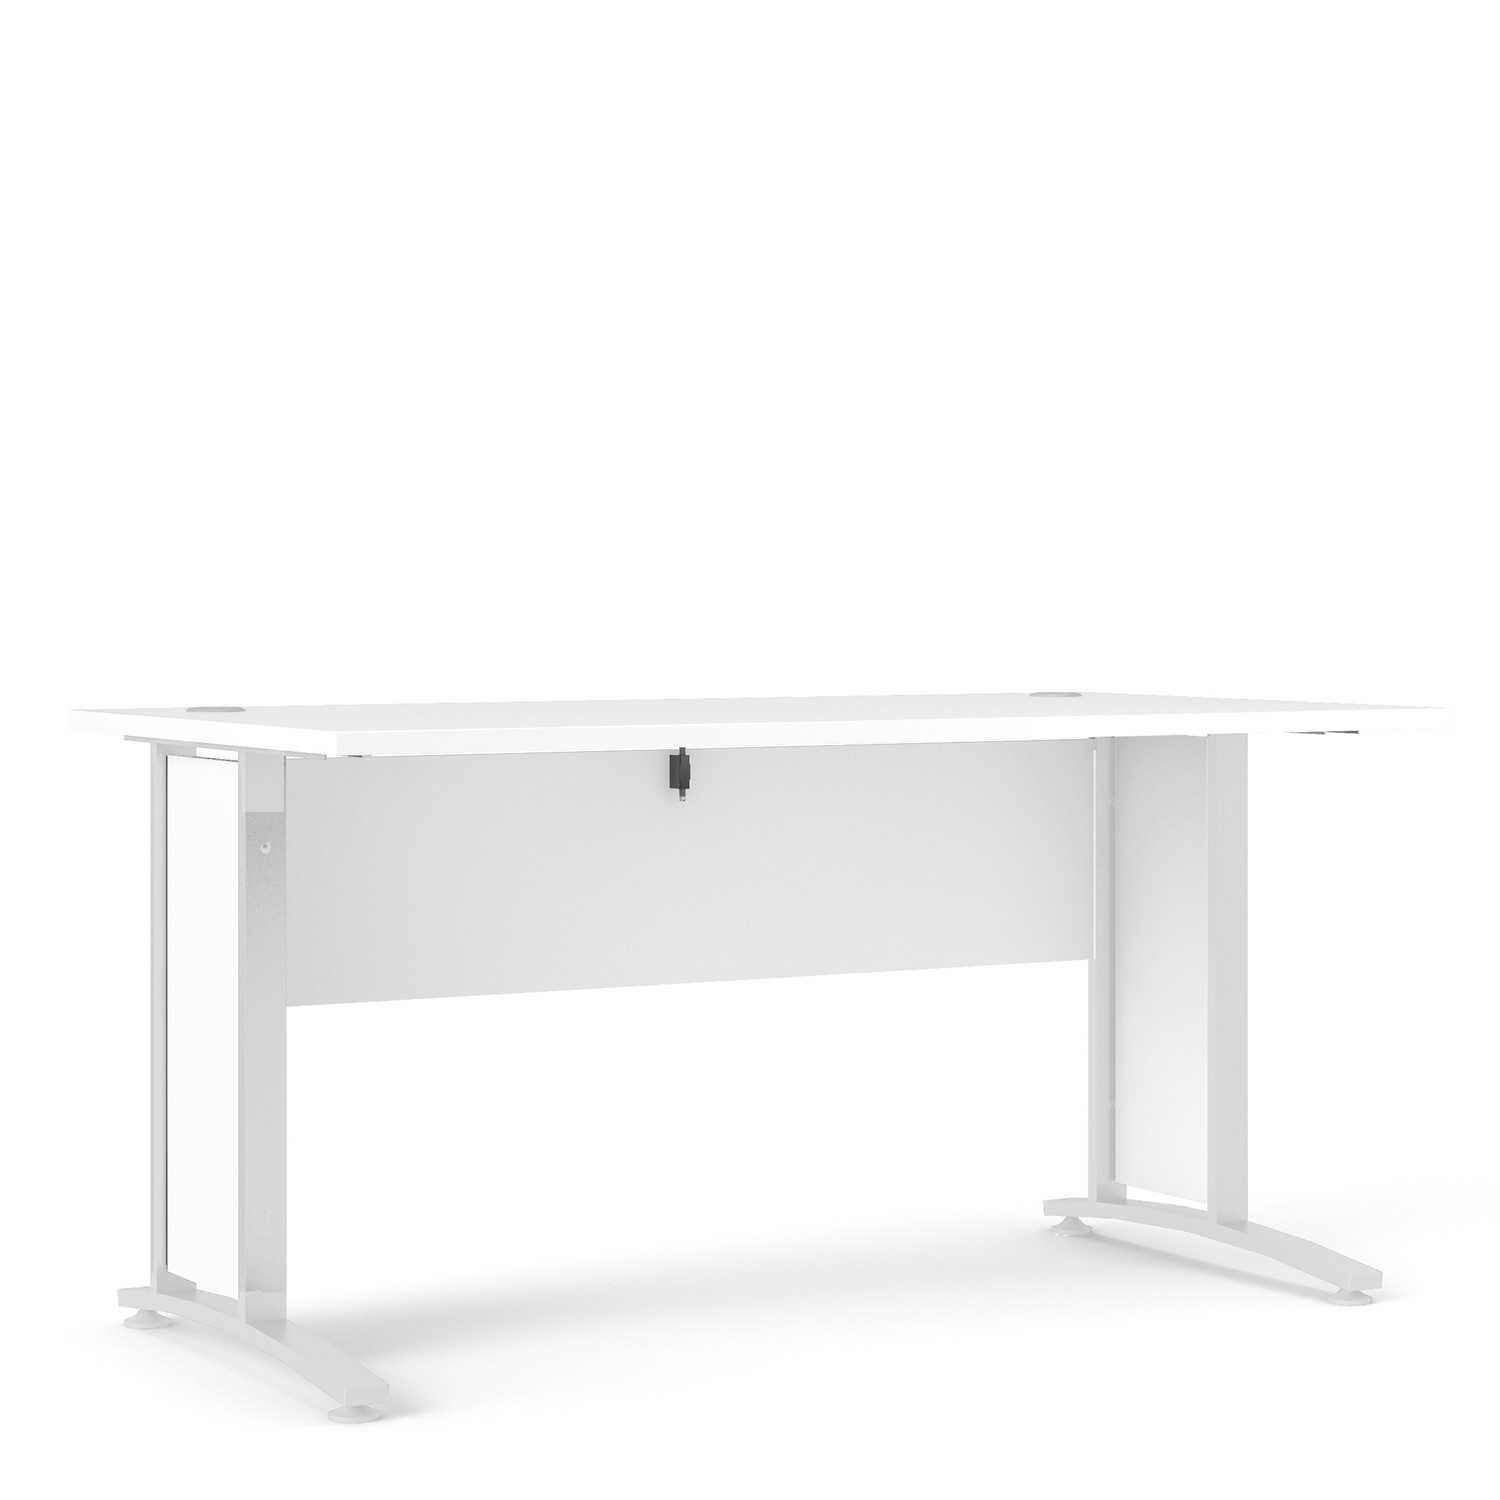 Photo of Large white wooden office desk - prima